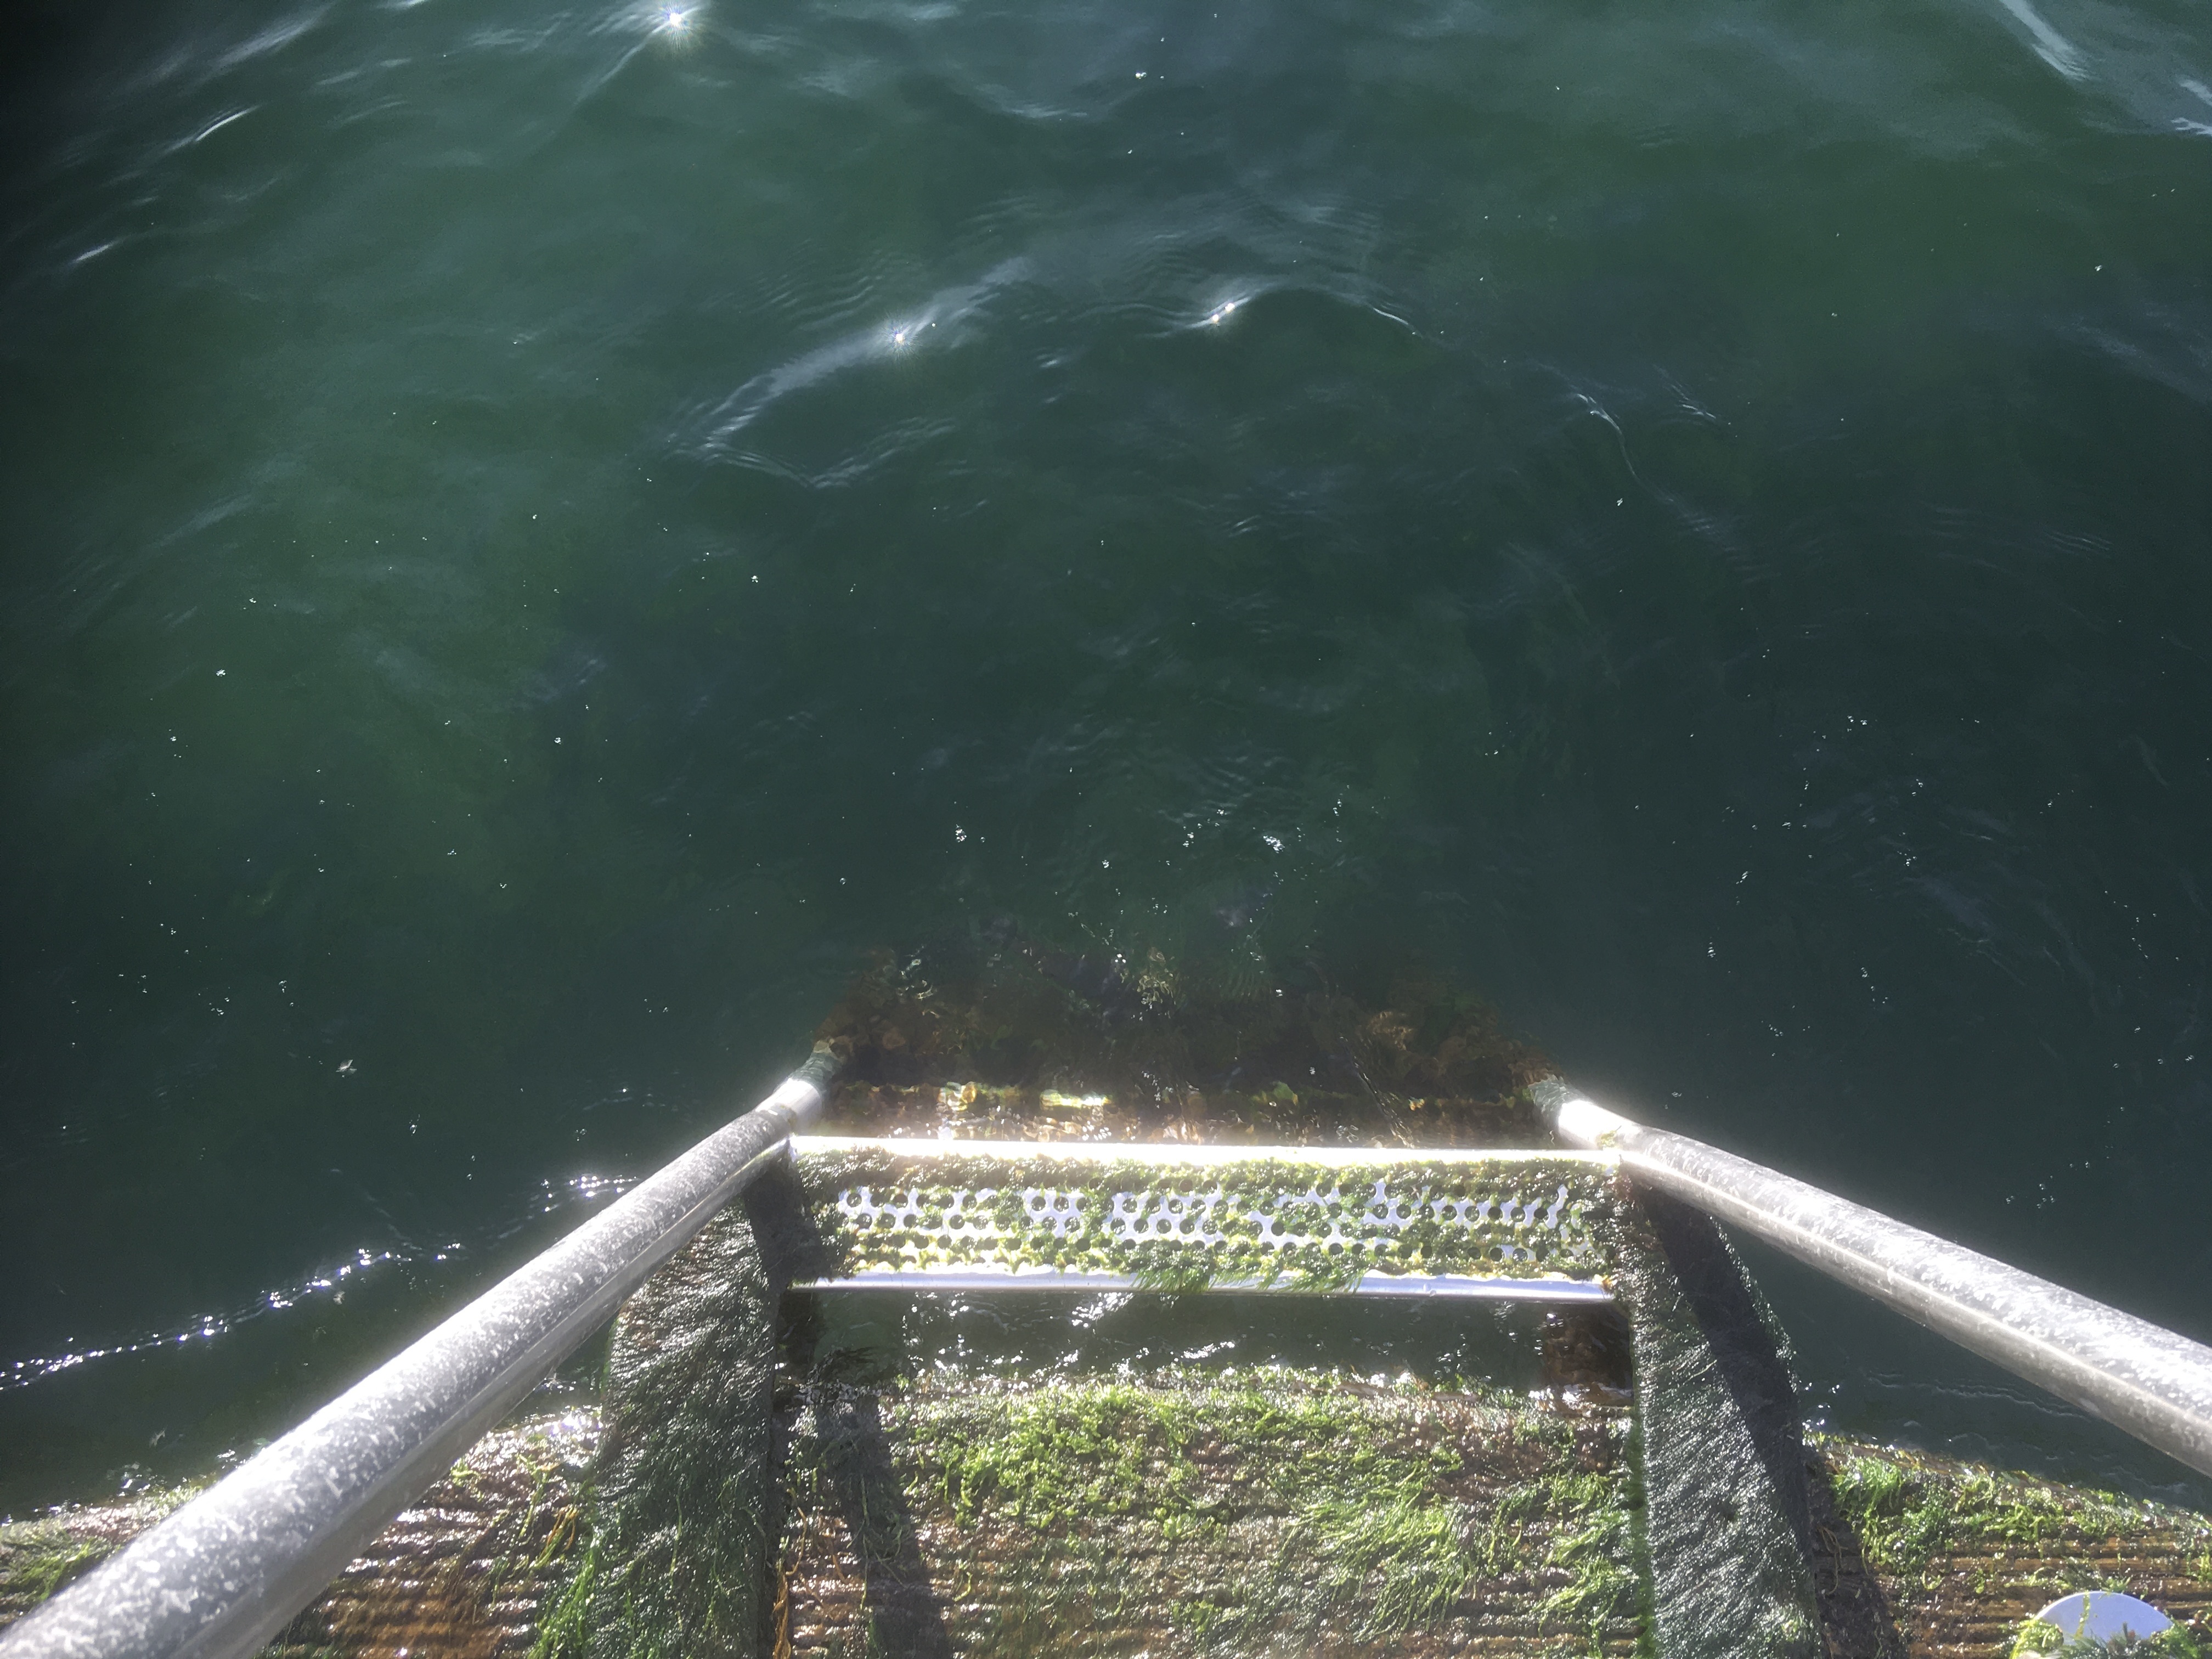 A jetty with steps down into cold water.